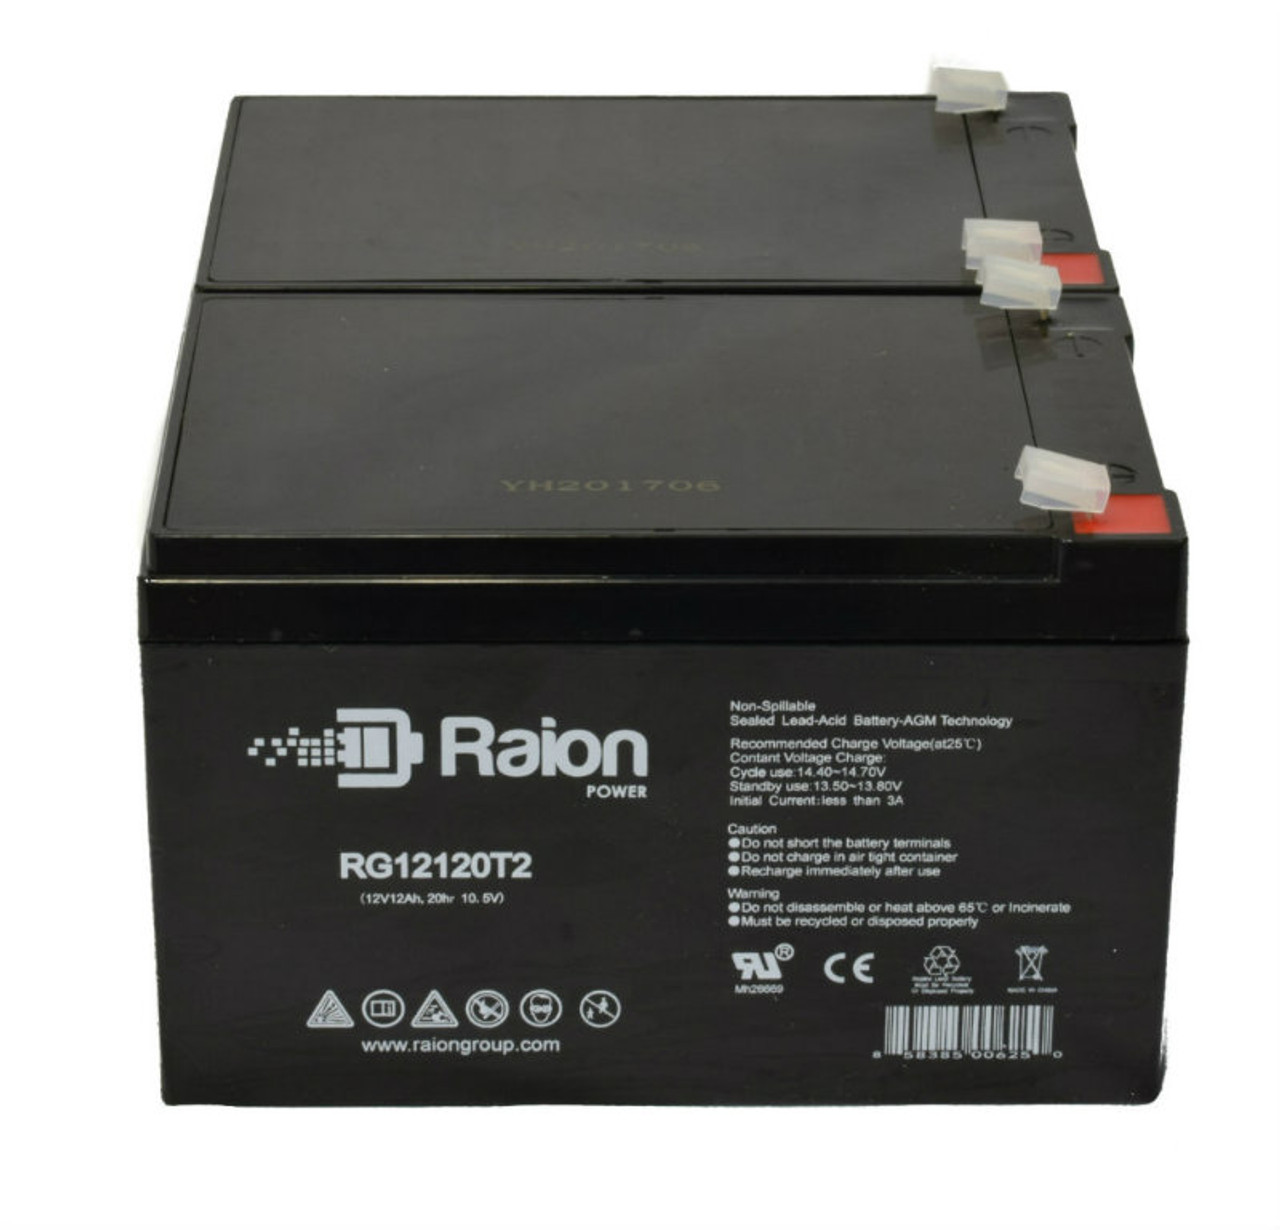 Raion Power 12V 12Ah Non-Spillable Compatible Replacement Battery for Baoshi Power 6-DZM-12 - (2 Pack)